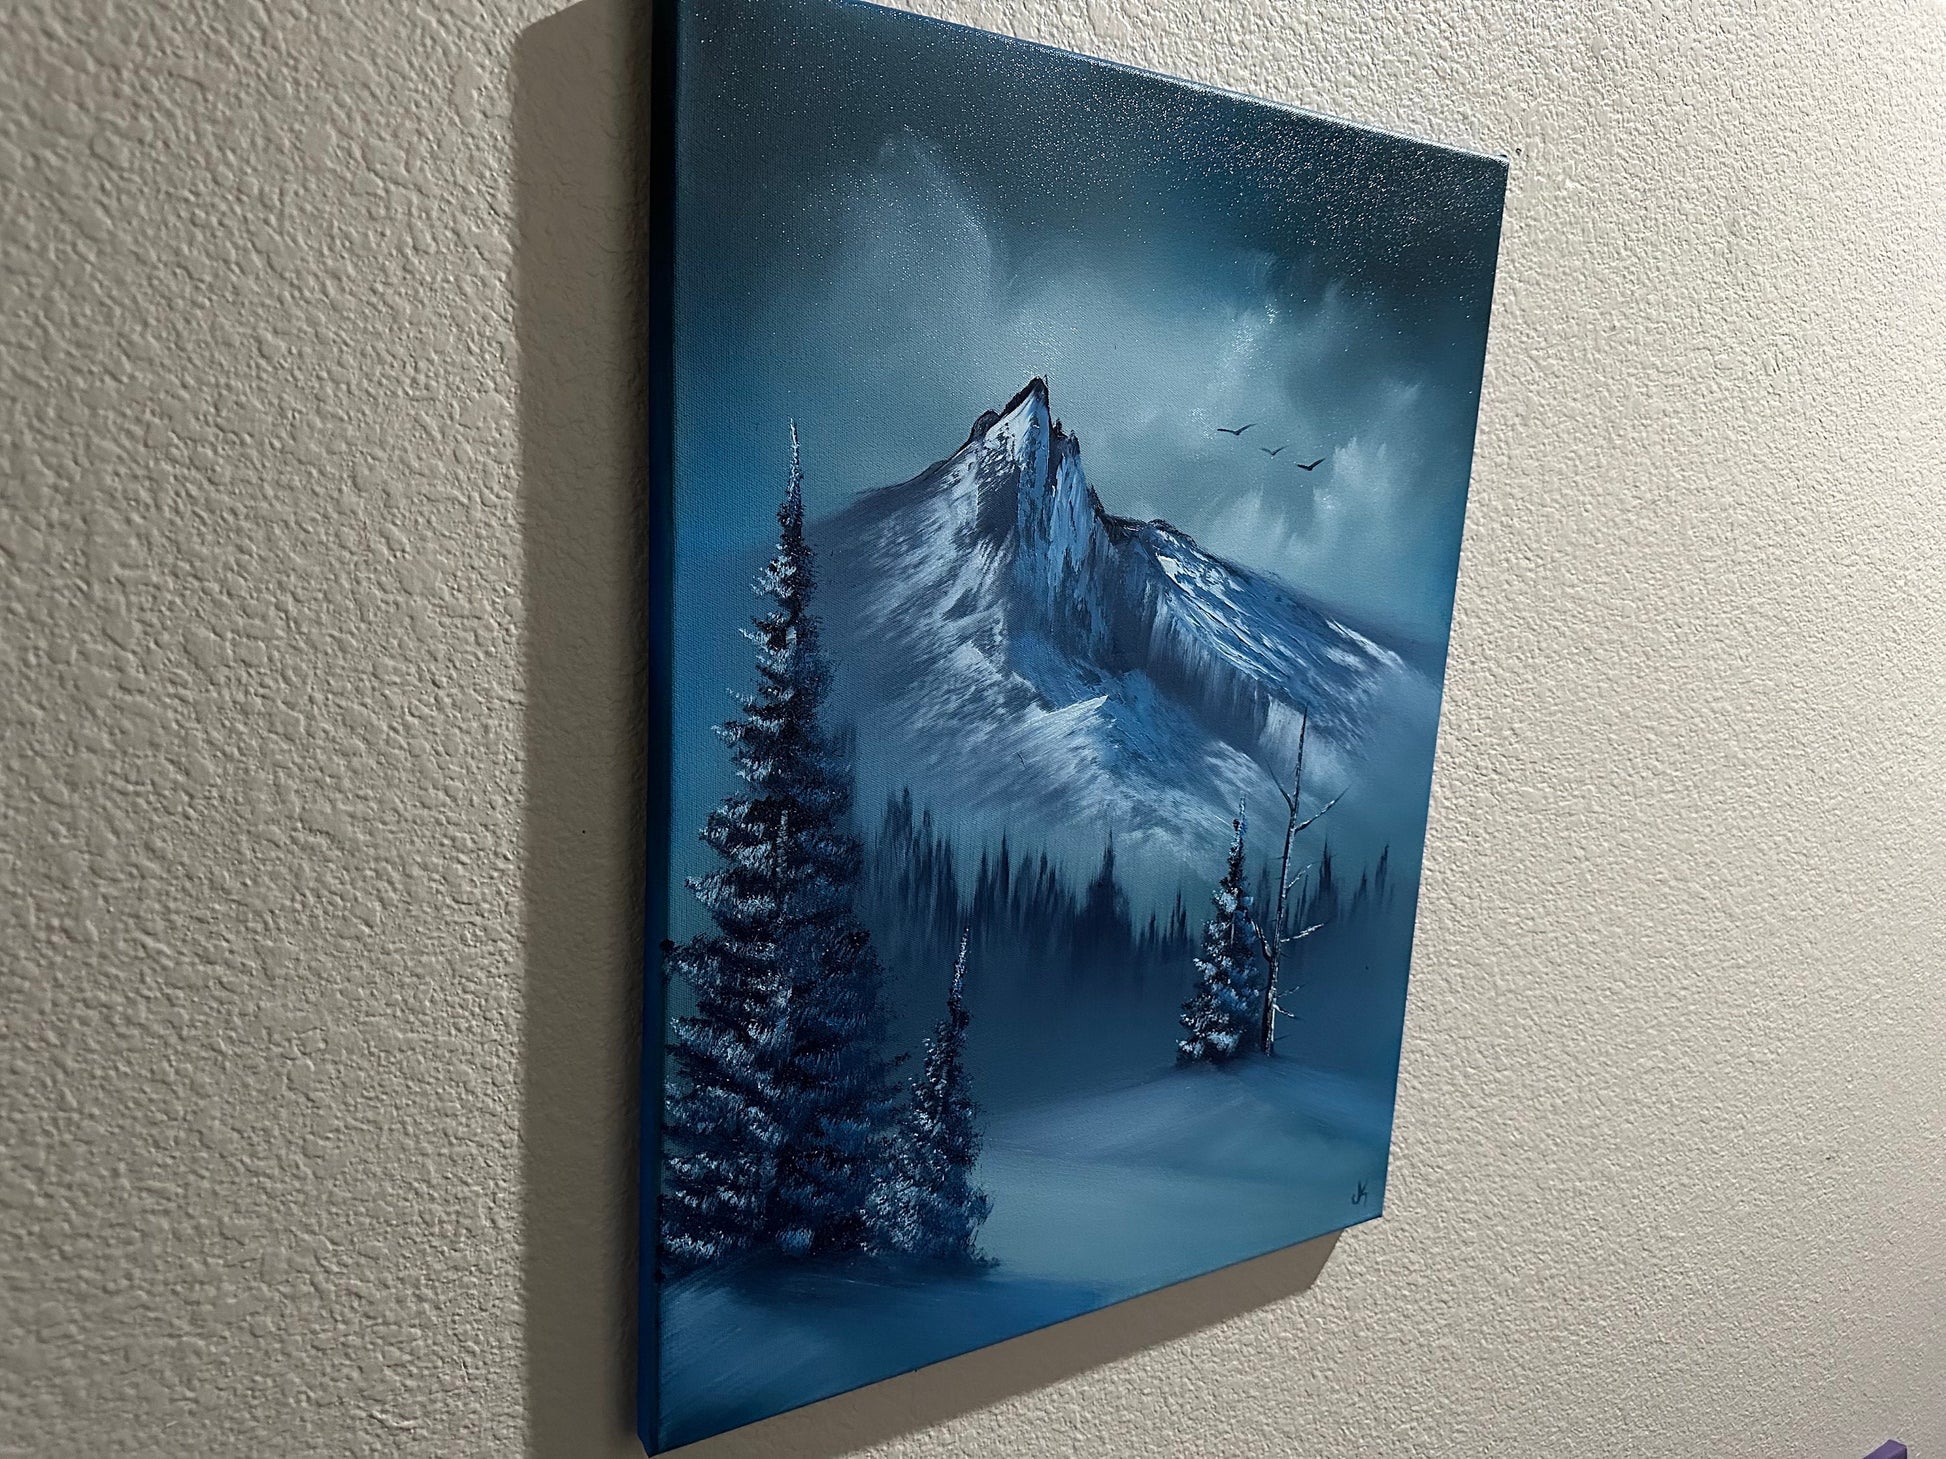 Painting 937 - 18x24" Liquitex Recycled Canvas - Cold Blue Winter painted Live on TikTok on 9/9/23 by PaintWithJosh